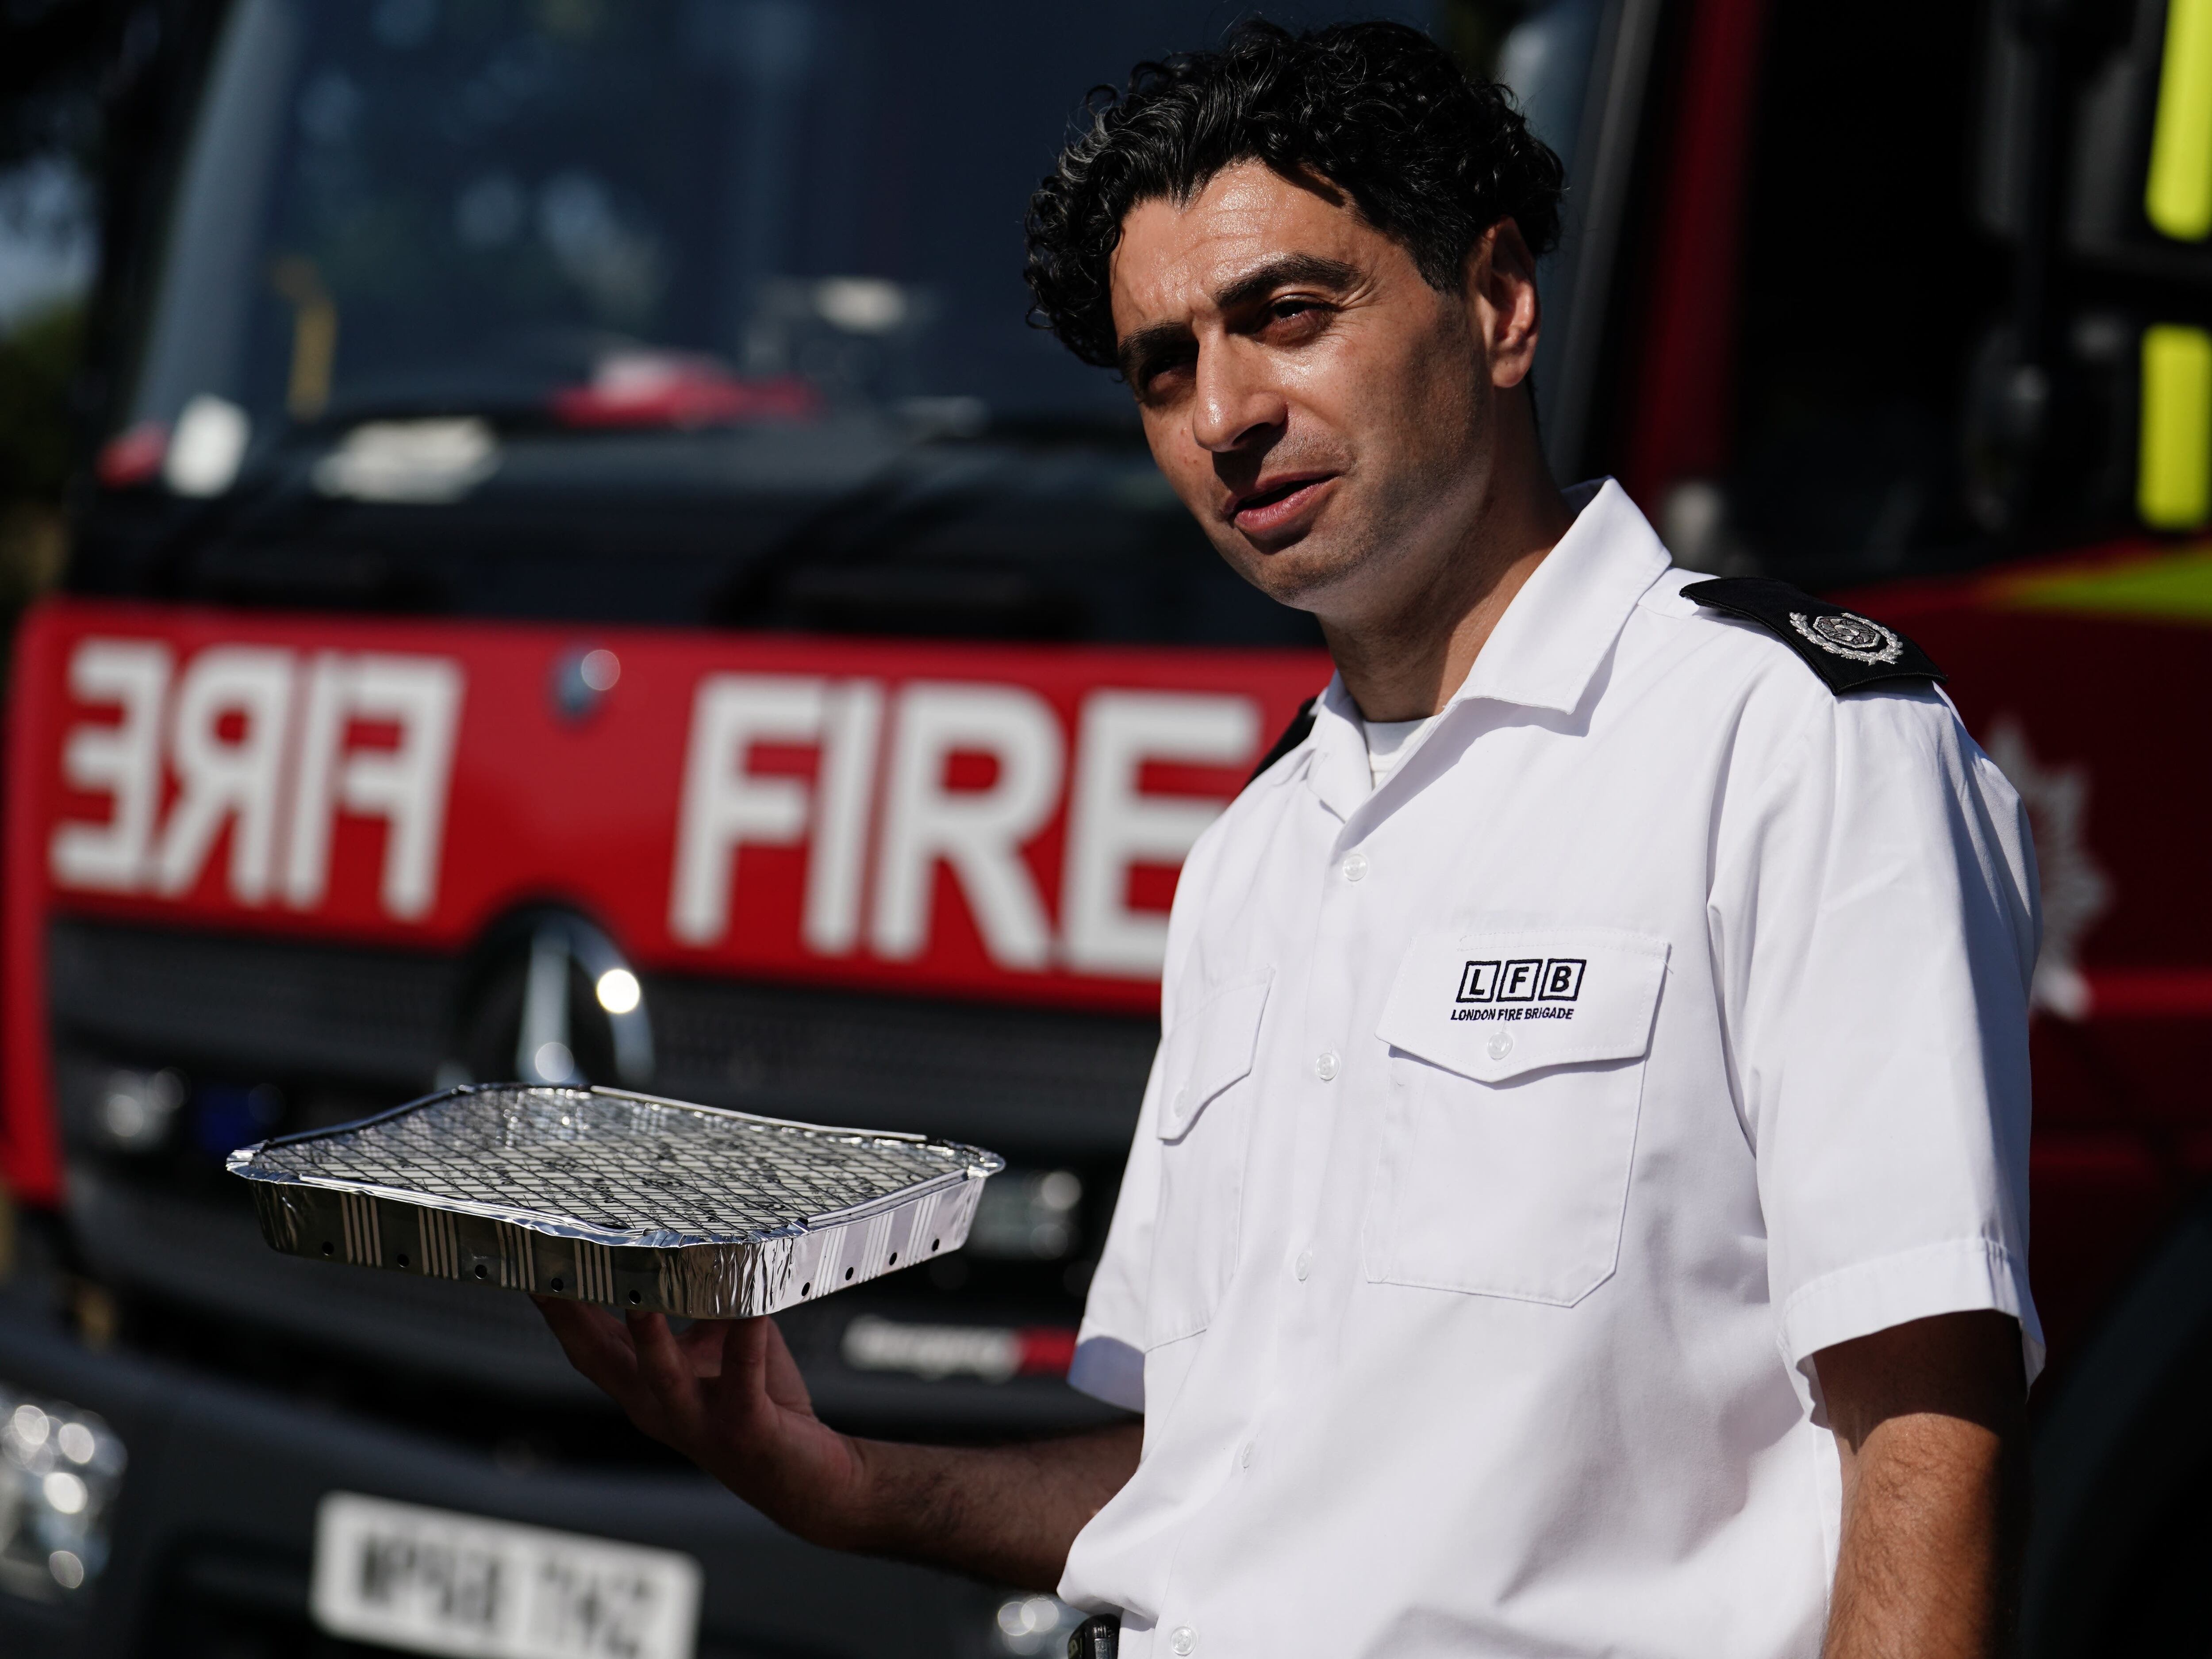 LFB in ‘much better position’ to tackle fires in extreme heat, spokesman says